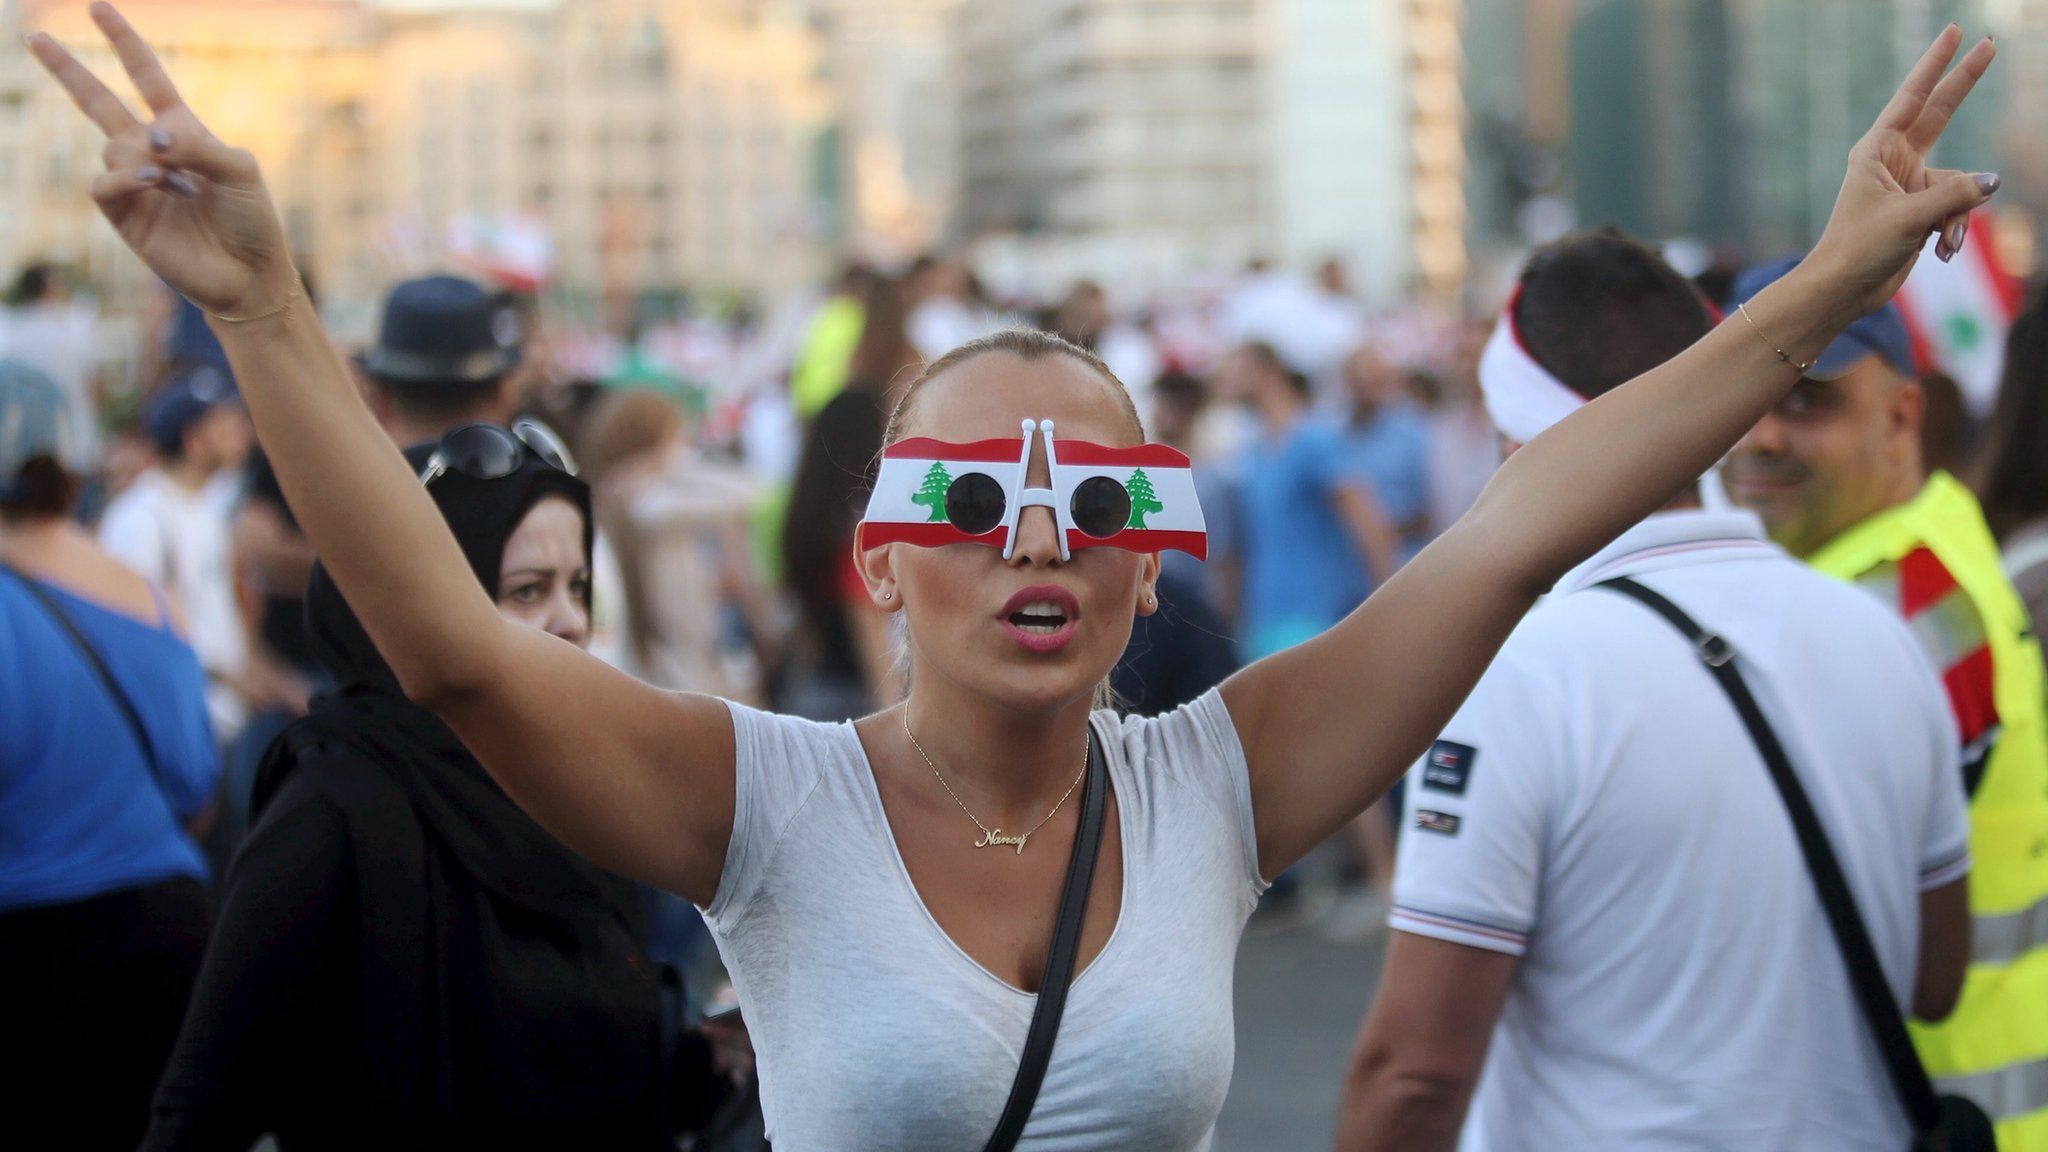 Anti-government protest in Beirut on 29 August 2015